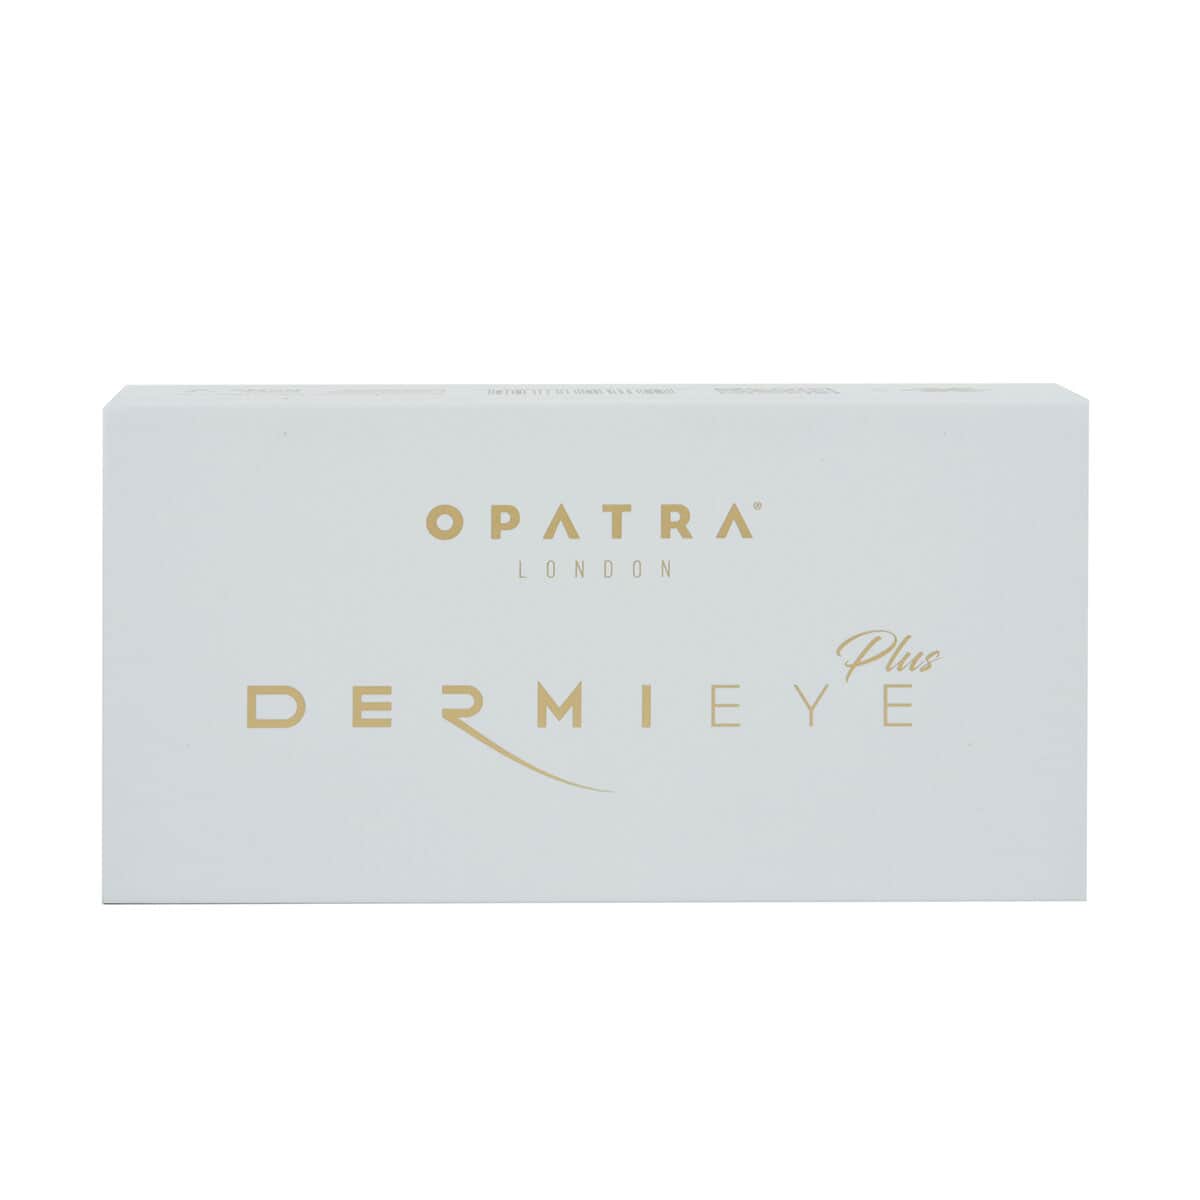 OPATRA DermiEye Plus with Massage, Heat & LED Light Therapy (Warranty Included ) image number 5